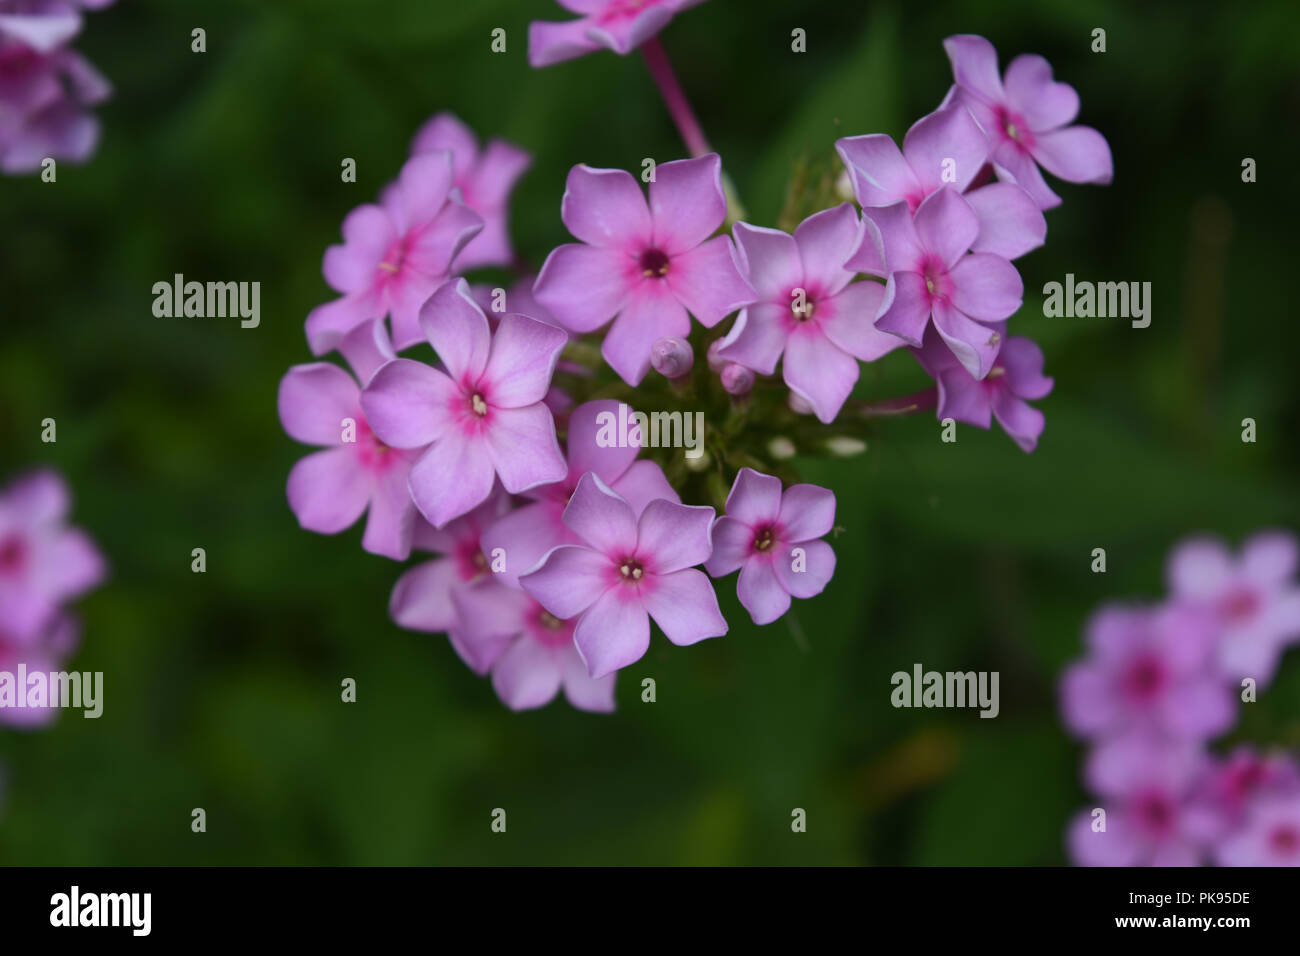 Pale pink phlox flowers in a garden blooming. Stock Photo